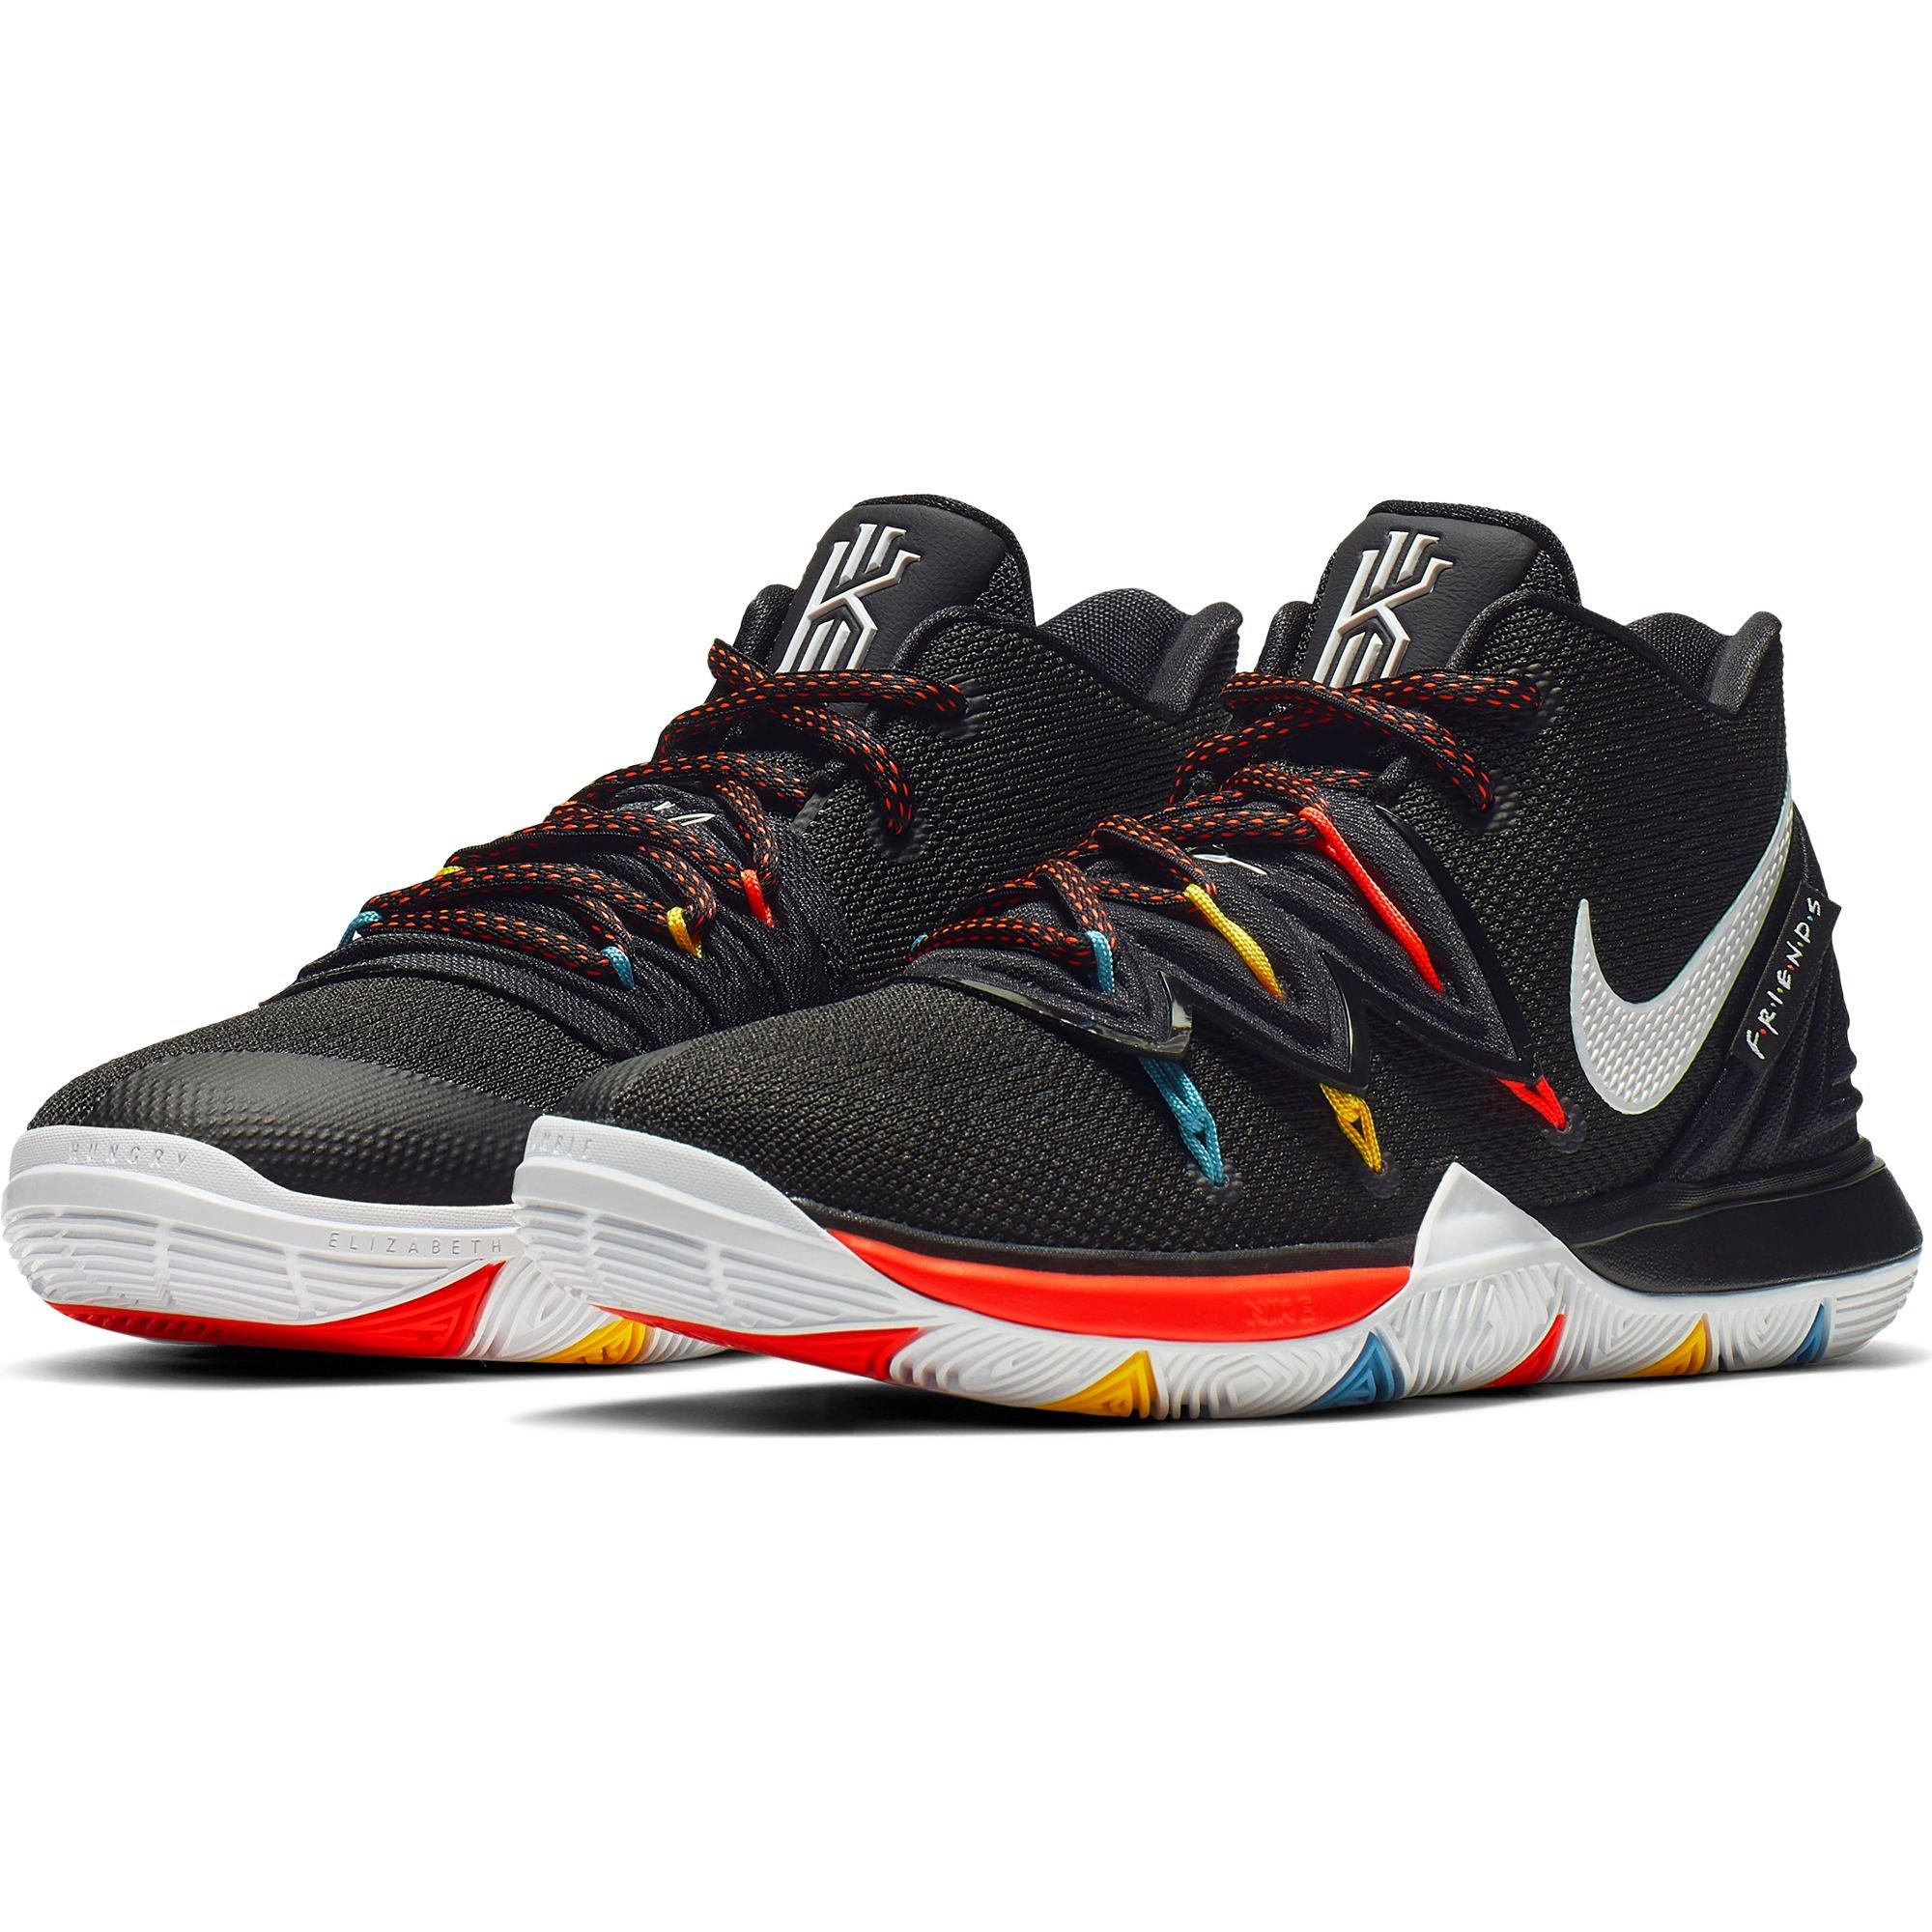 New Buy Cheap Nike Kyrie 5 Black White Red For Sale Online